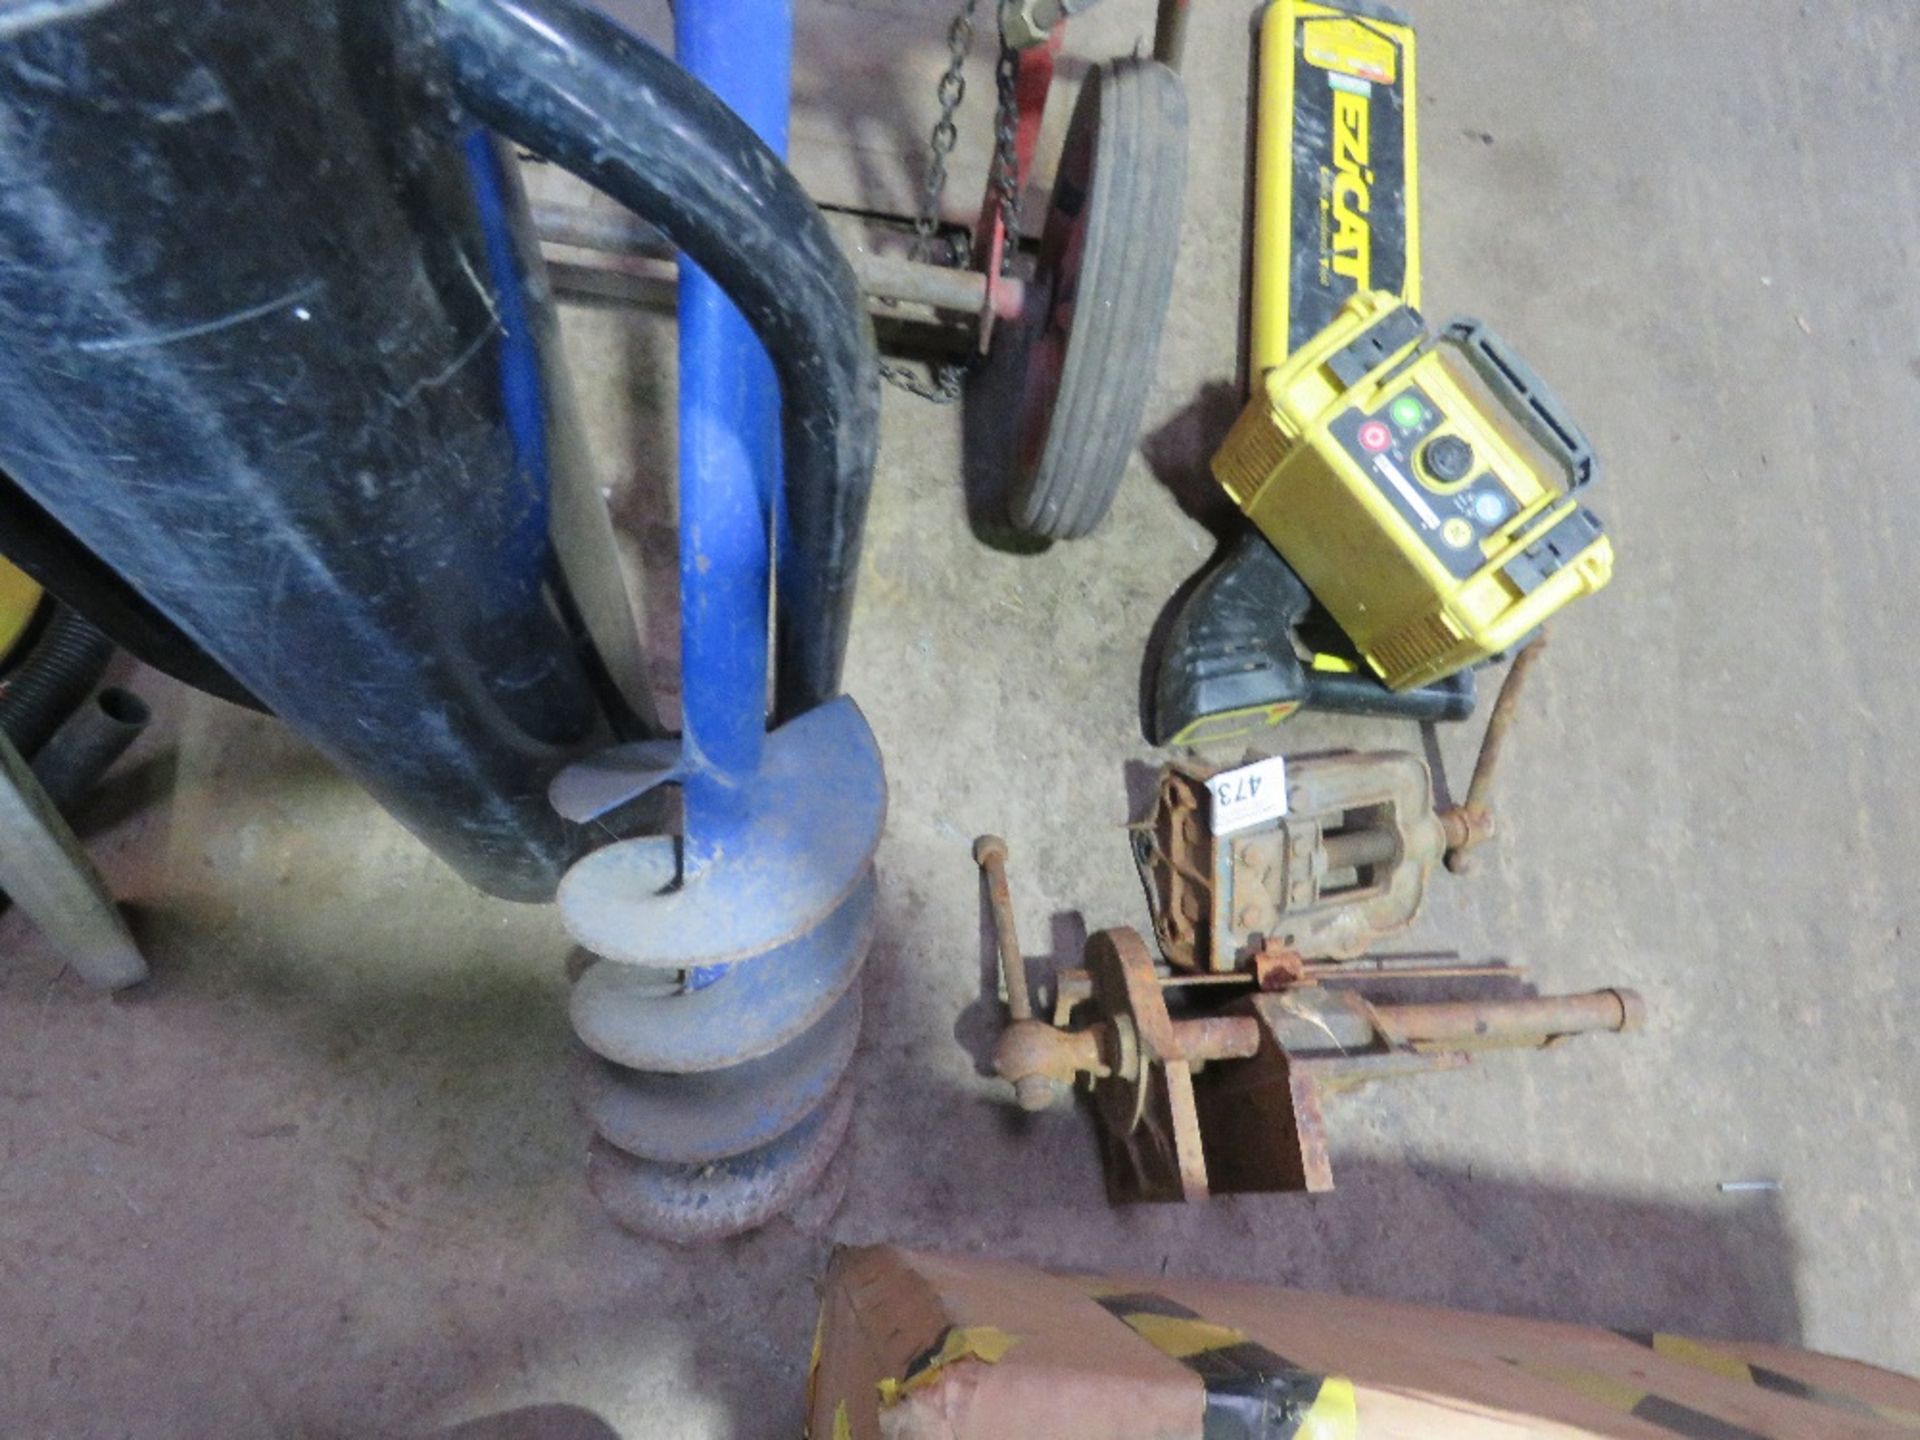 SPIRIT LEVEL, HAND AUGER AND POST DRIVER. SOURCED FROM SITE CLOSURE/CLEARANCE. - Image 2 of 4